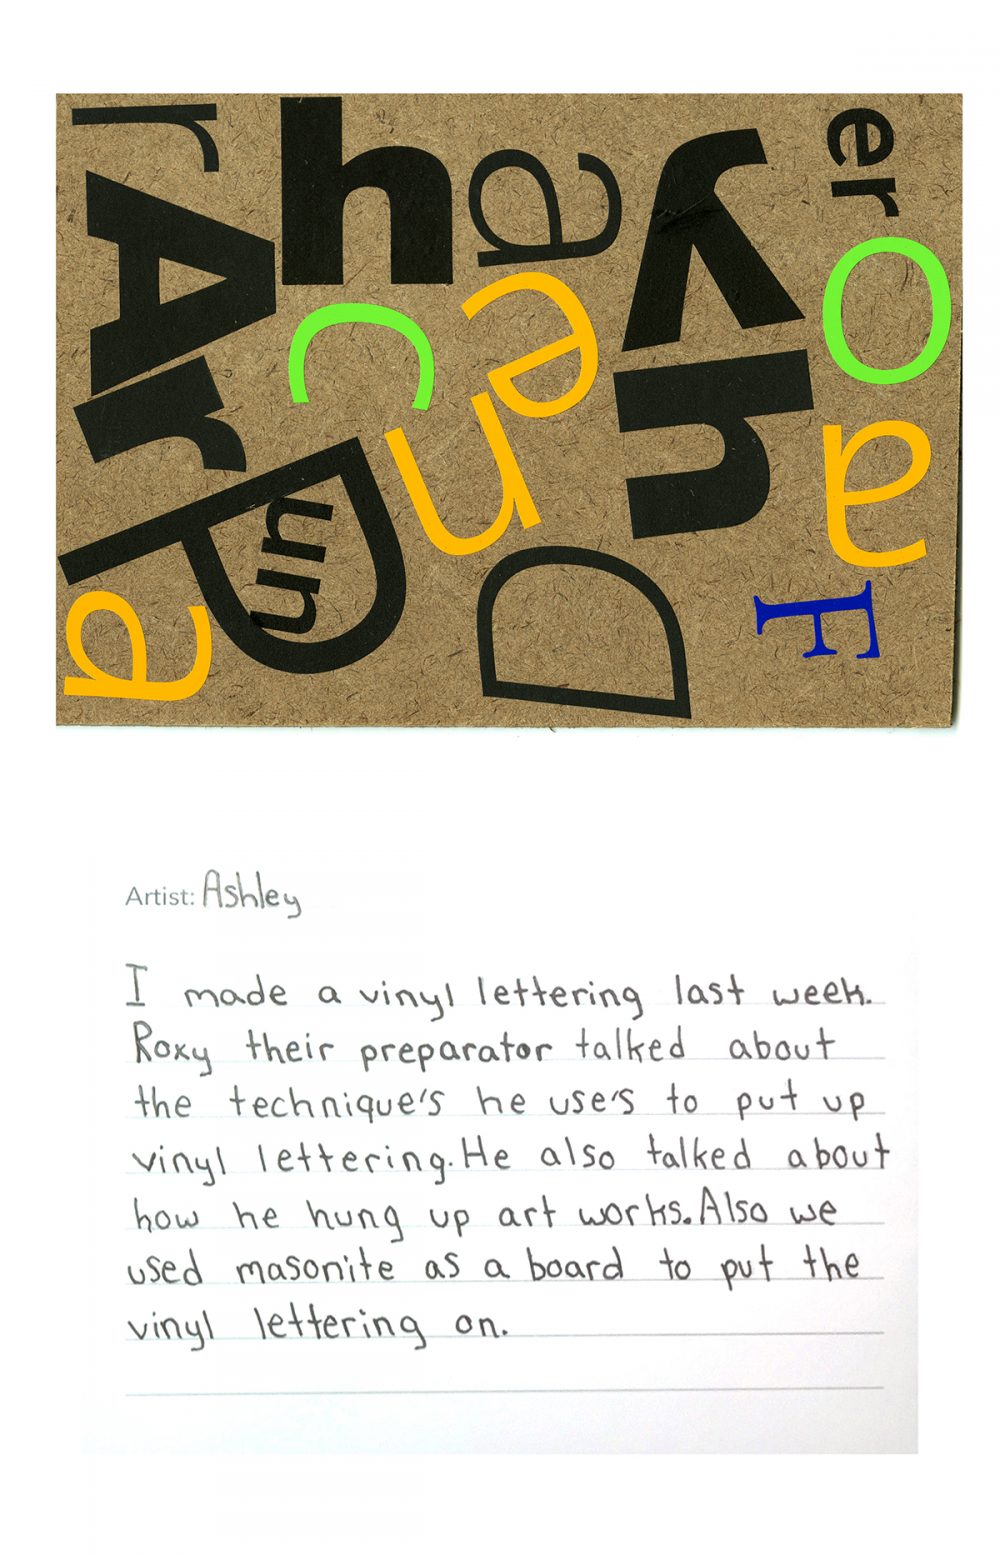 A brown masonite board is covered in black, yellow, green, and blue vinyl letters. Below, a handwritten text reads "Artist: Ashley", "I made a vinyl lettering last week. Roxy their preparator talked about the techniques he uses to put up vinyl lettering. He also talked about how he hung up artworks. Also we used masonite as a board to put the vinyl lettering on.